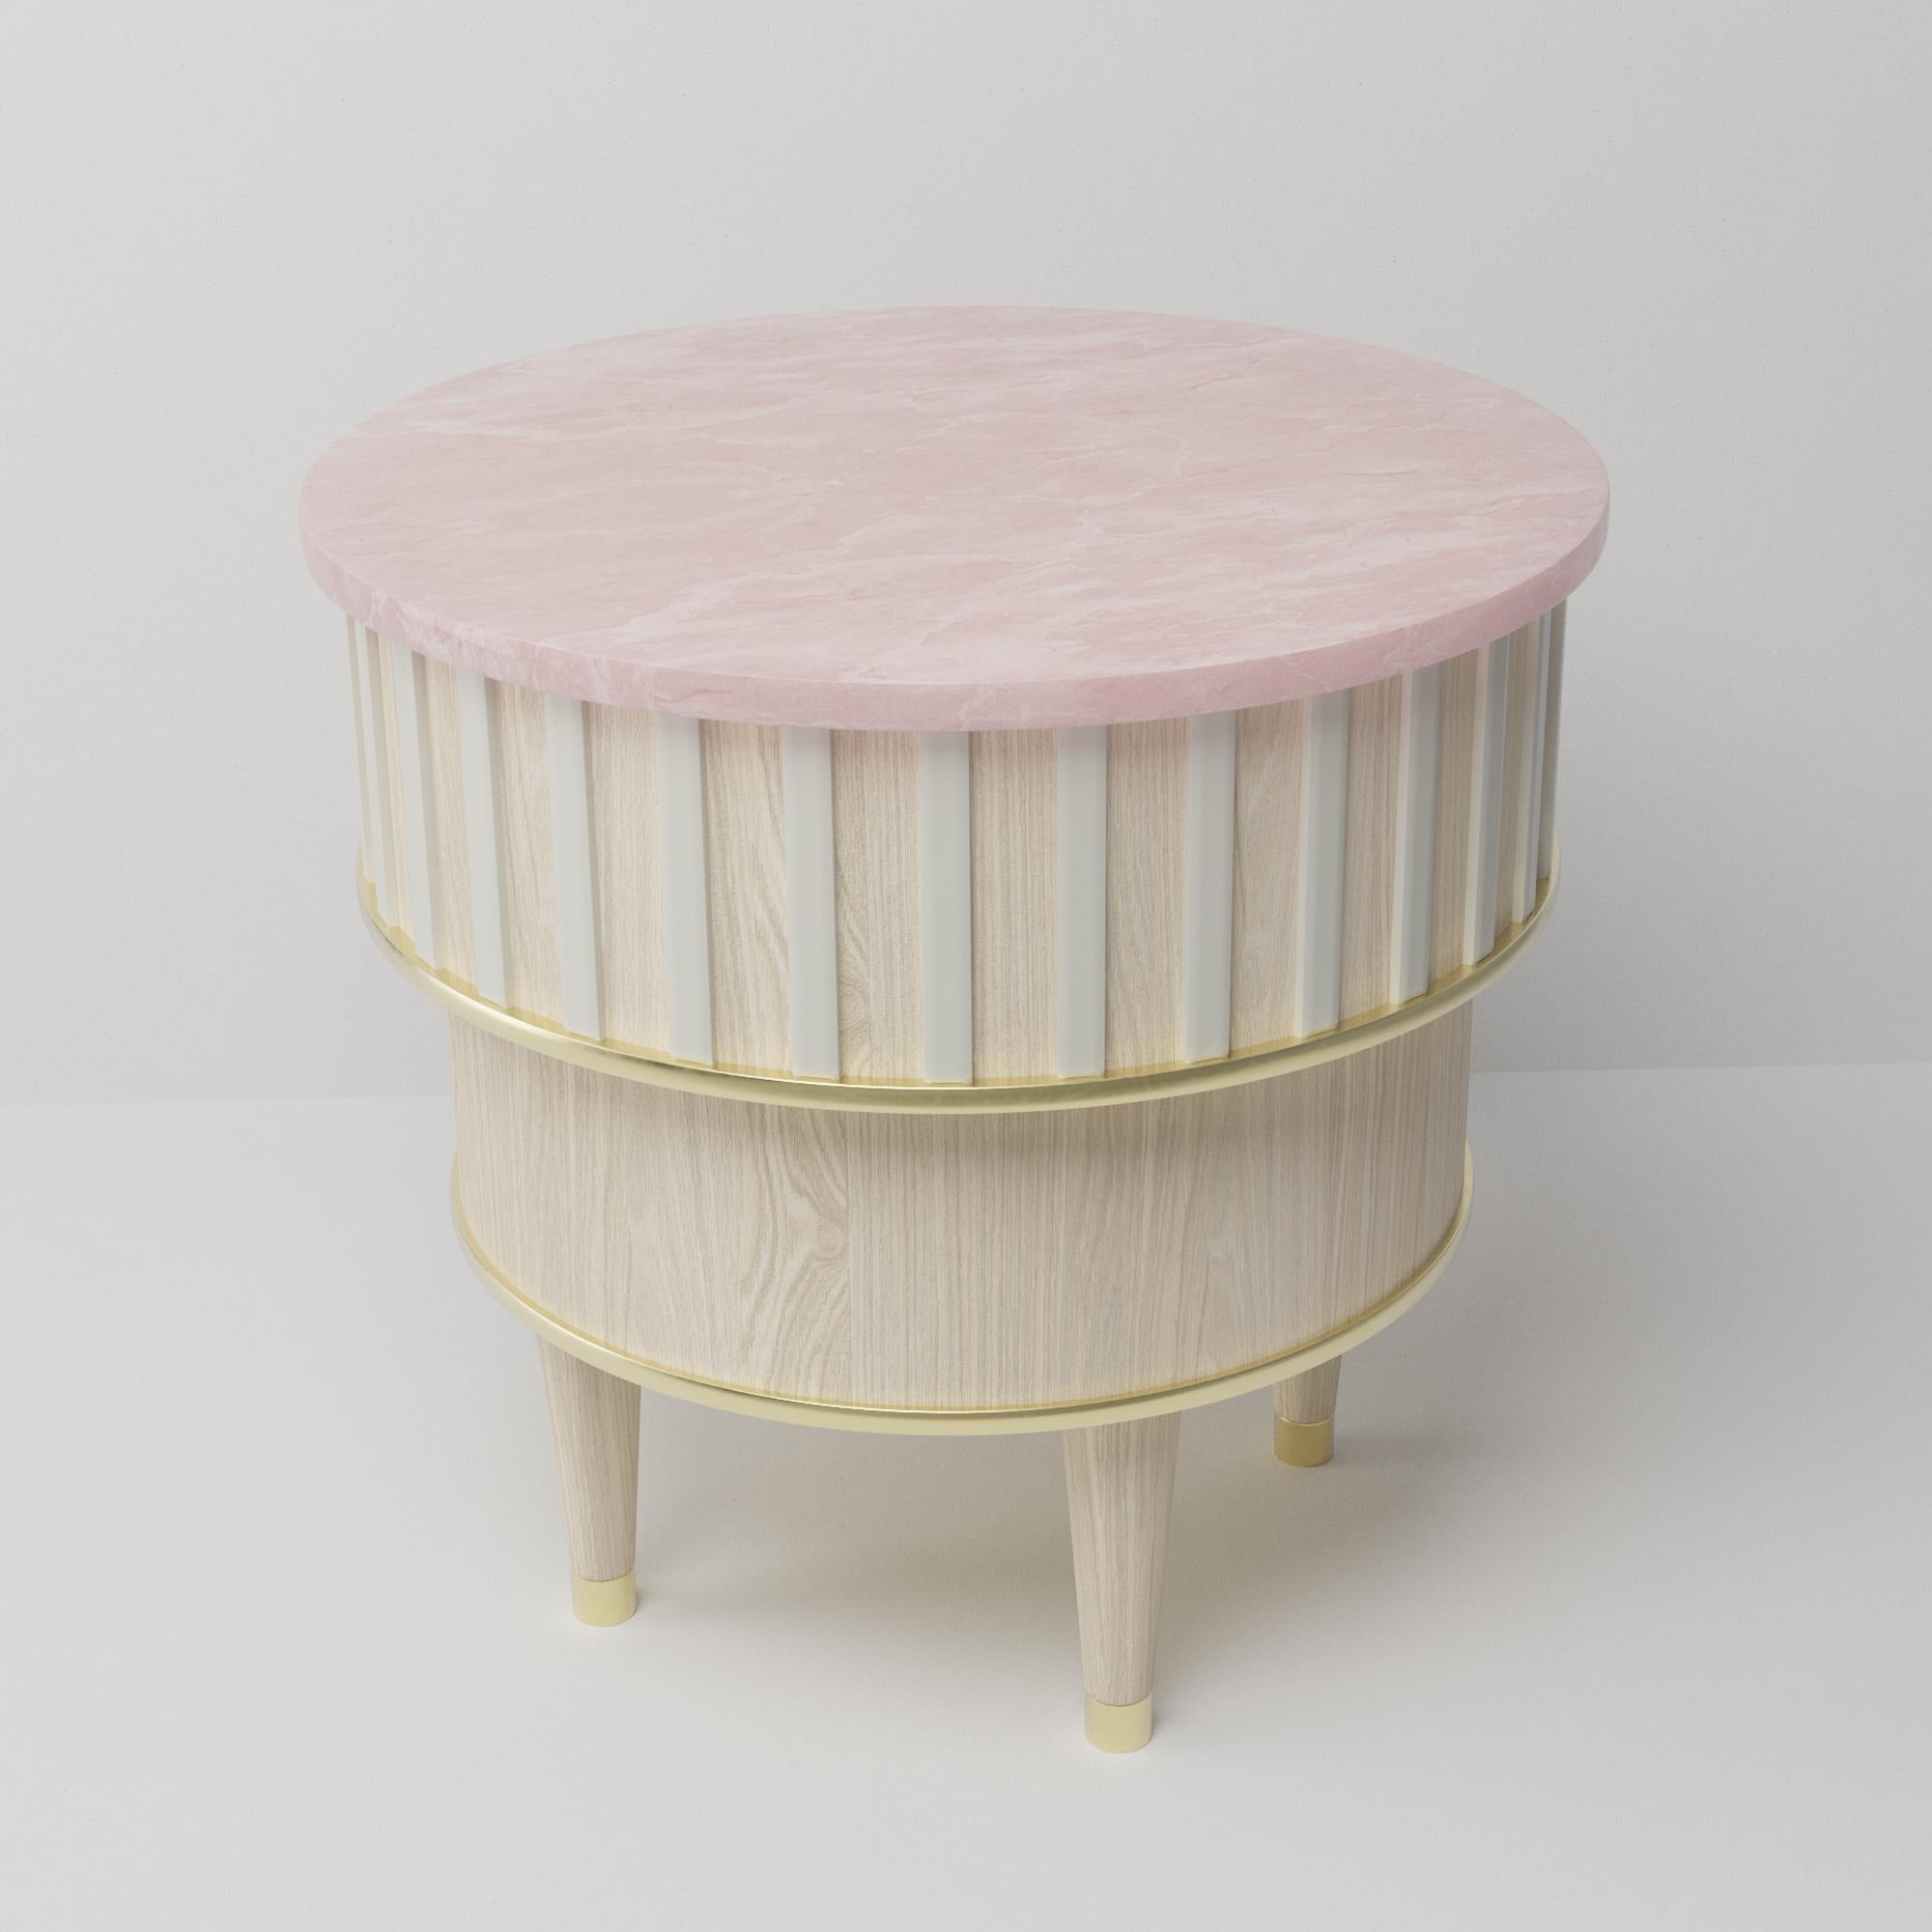 English Greta Bleached Oak Brass Corian and White Onyx Side Table by Felice James For Sale